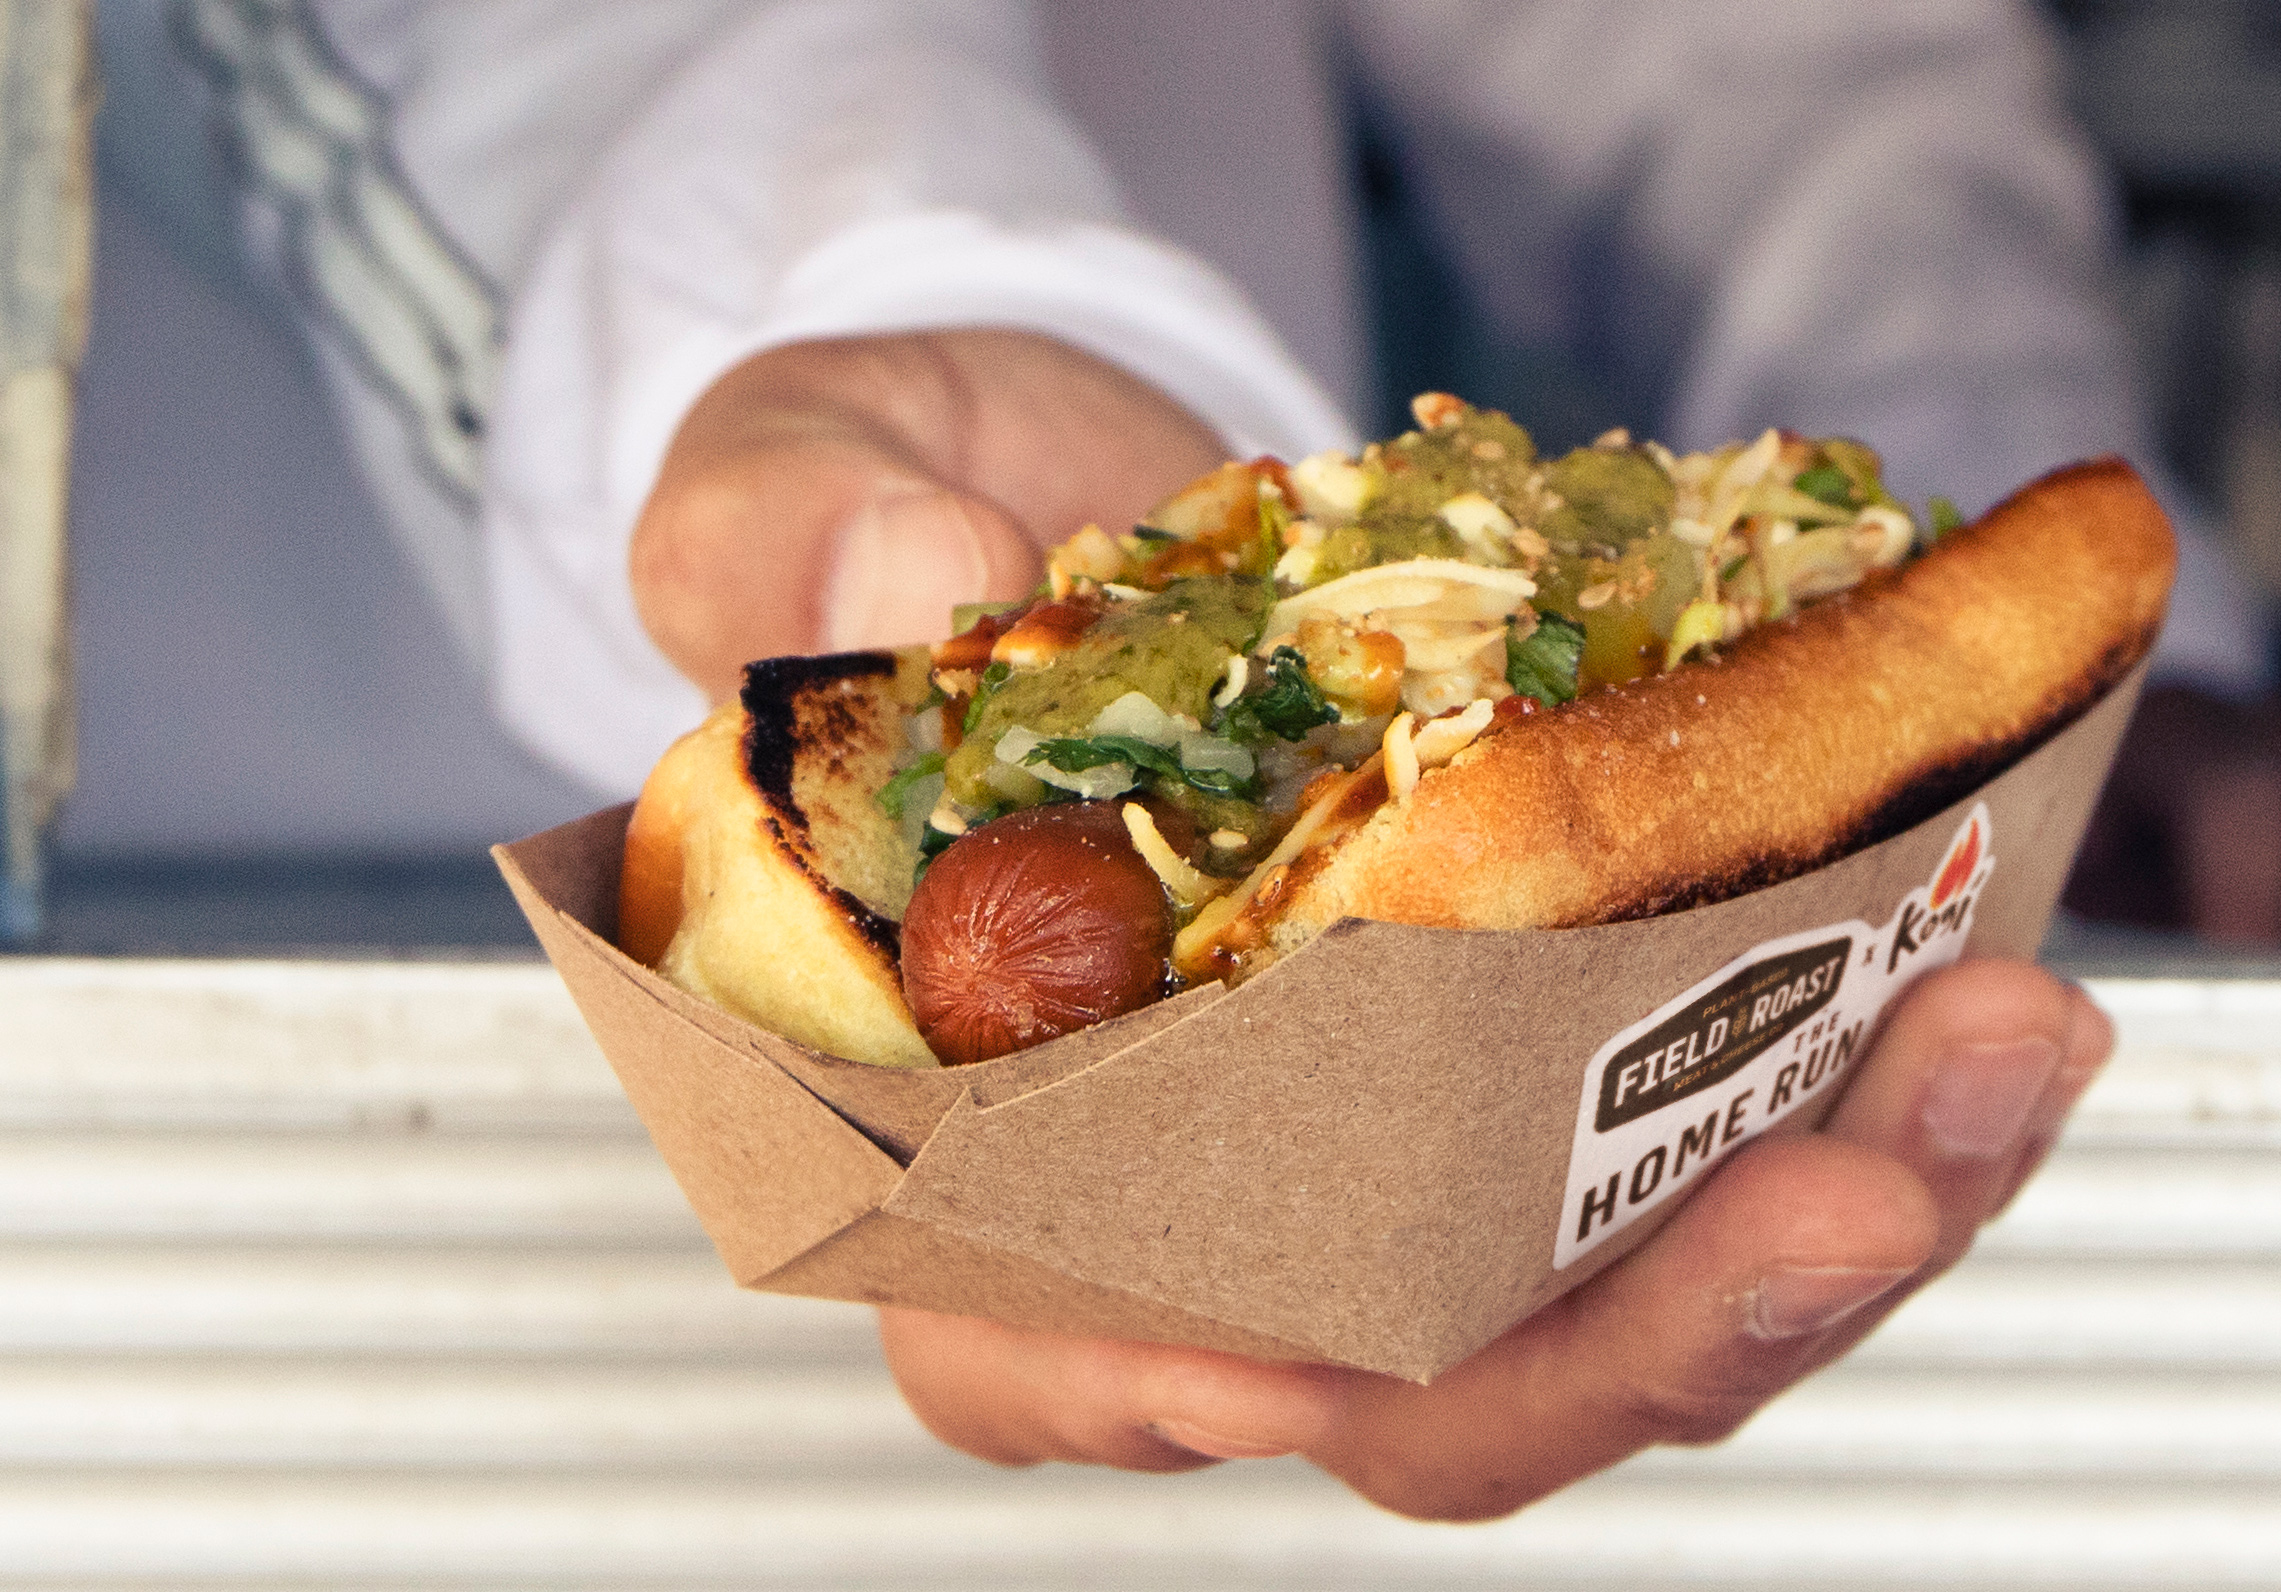 Wienerschnitzel Just Launched Its First Vegan Hot Dog at All 327 Locations